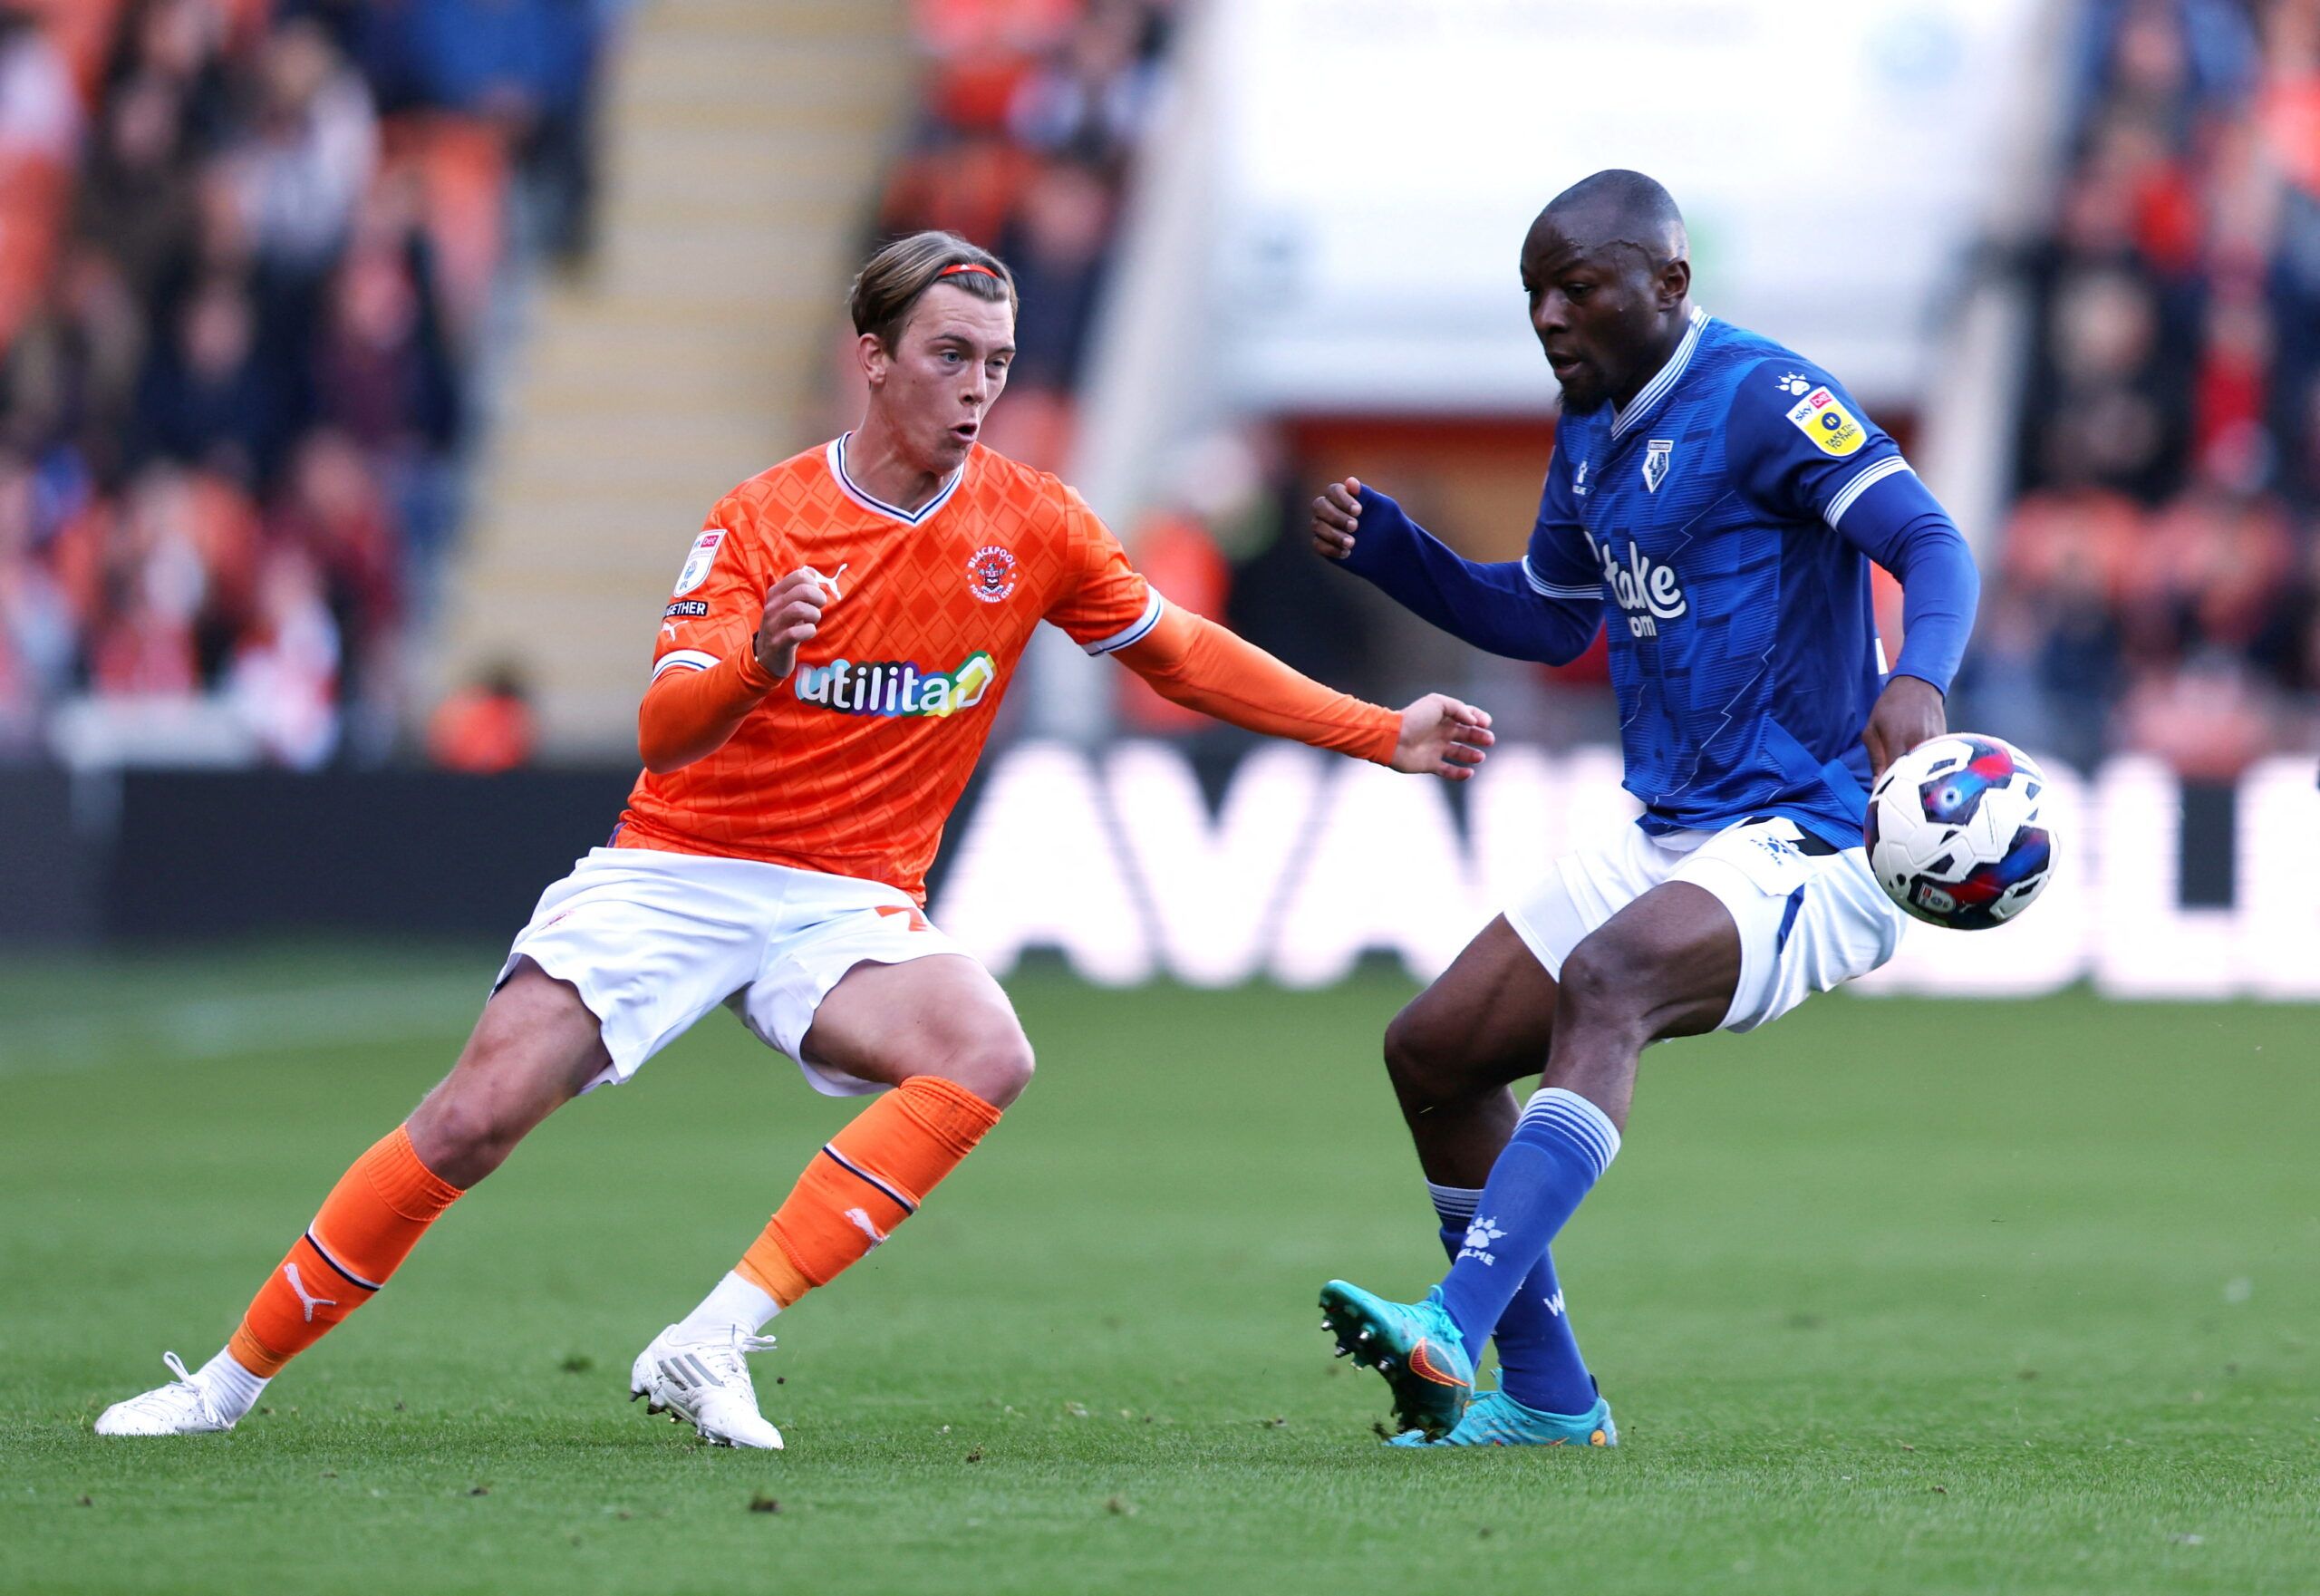 Soccer Football - Championship - Blackpool v Watford - Bloomfield Road, Blackpool, Britain - October 8, 2022 Blackpool's Callum Wright in action with Watford's Edo Kayembe  Action Images/John Clifton  EDITORIAL USE ONLY. No use with unauthorized audio, video, data, fixture lists, club/league logos or 